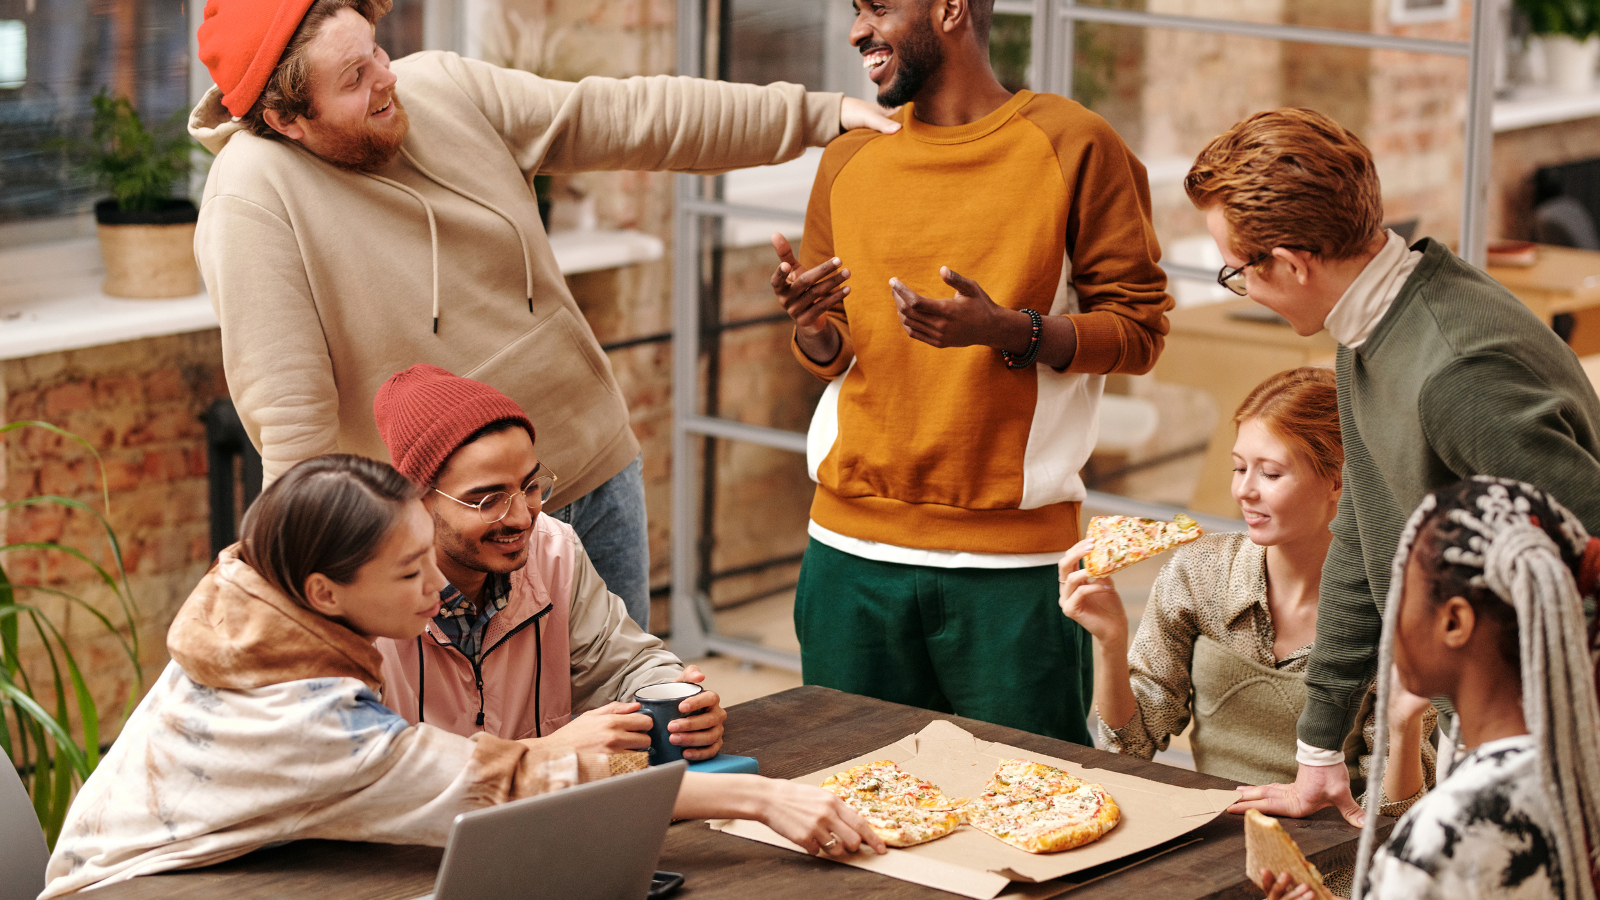 group of people eating pizza and talking